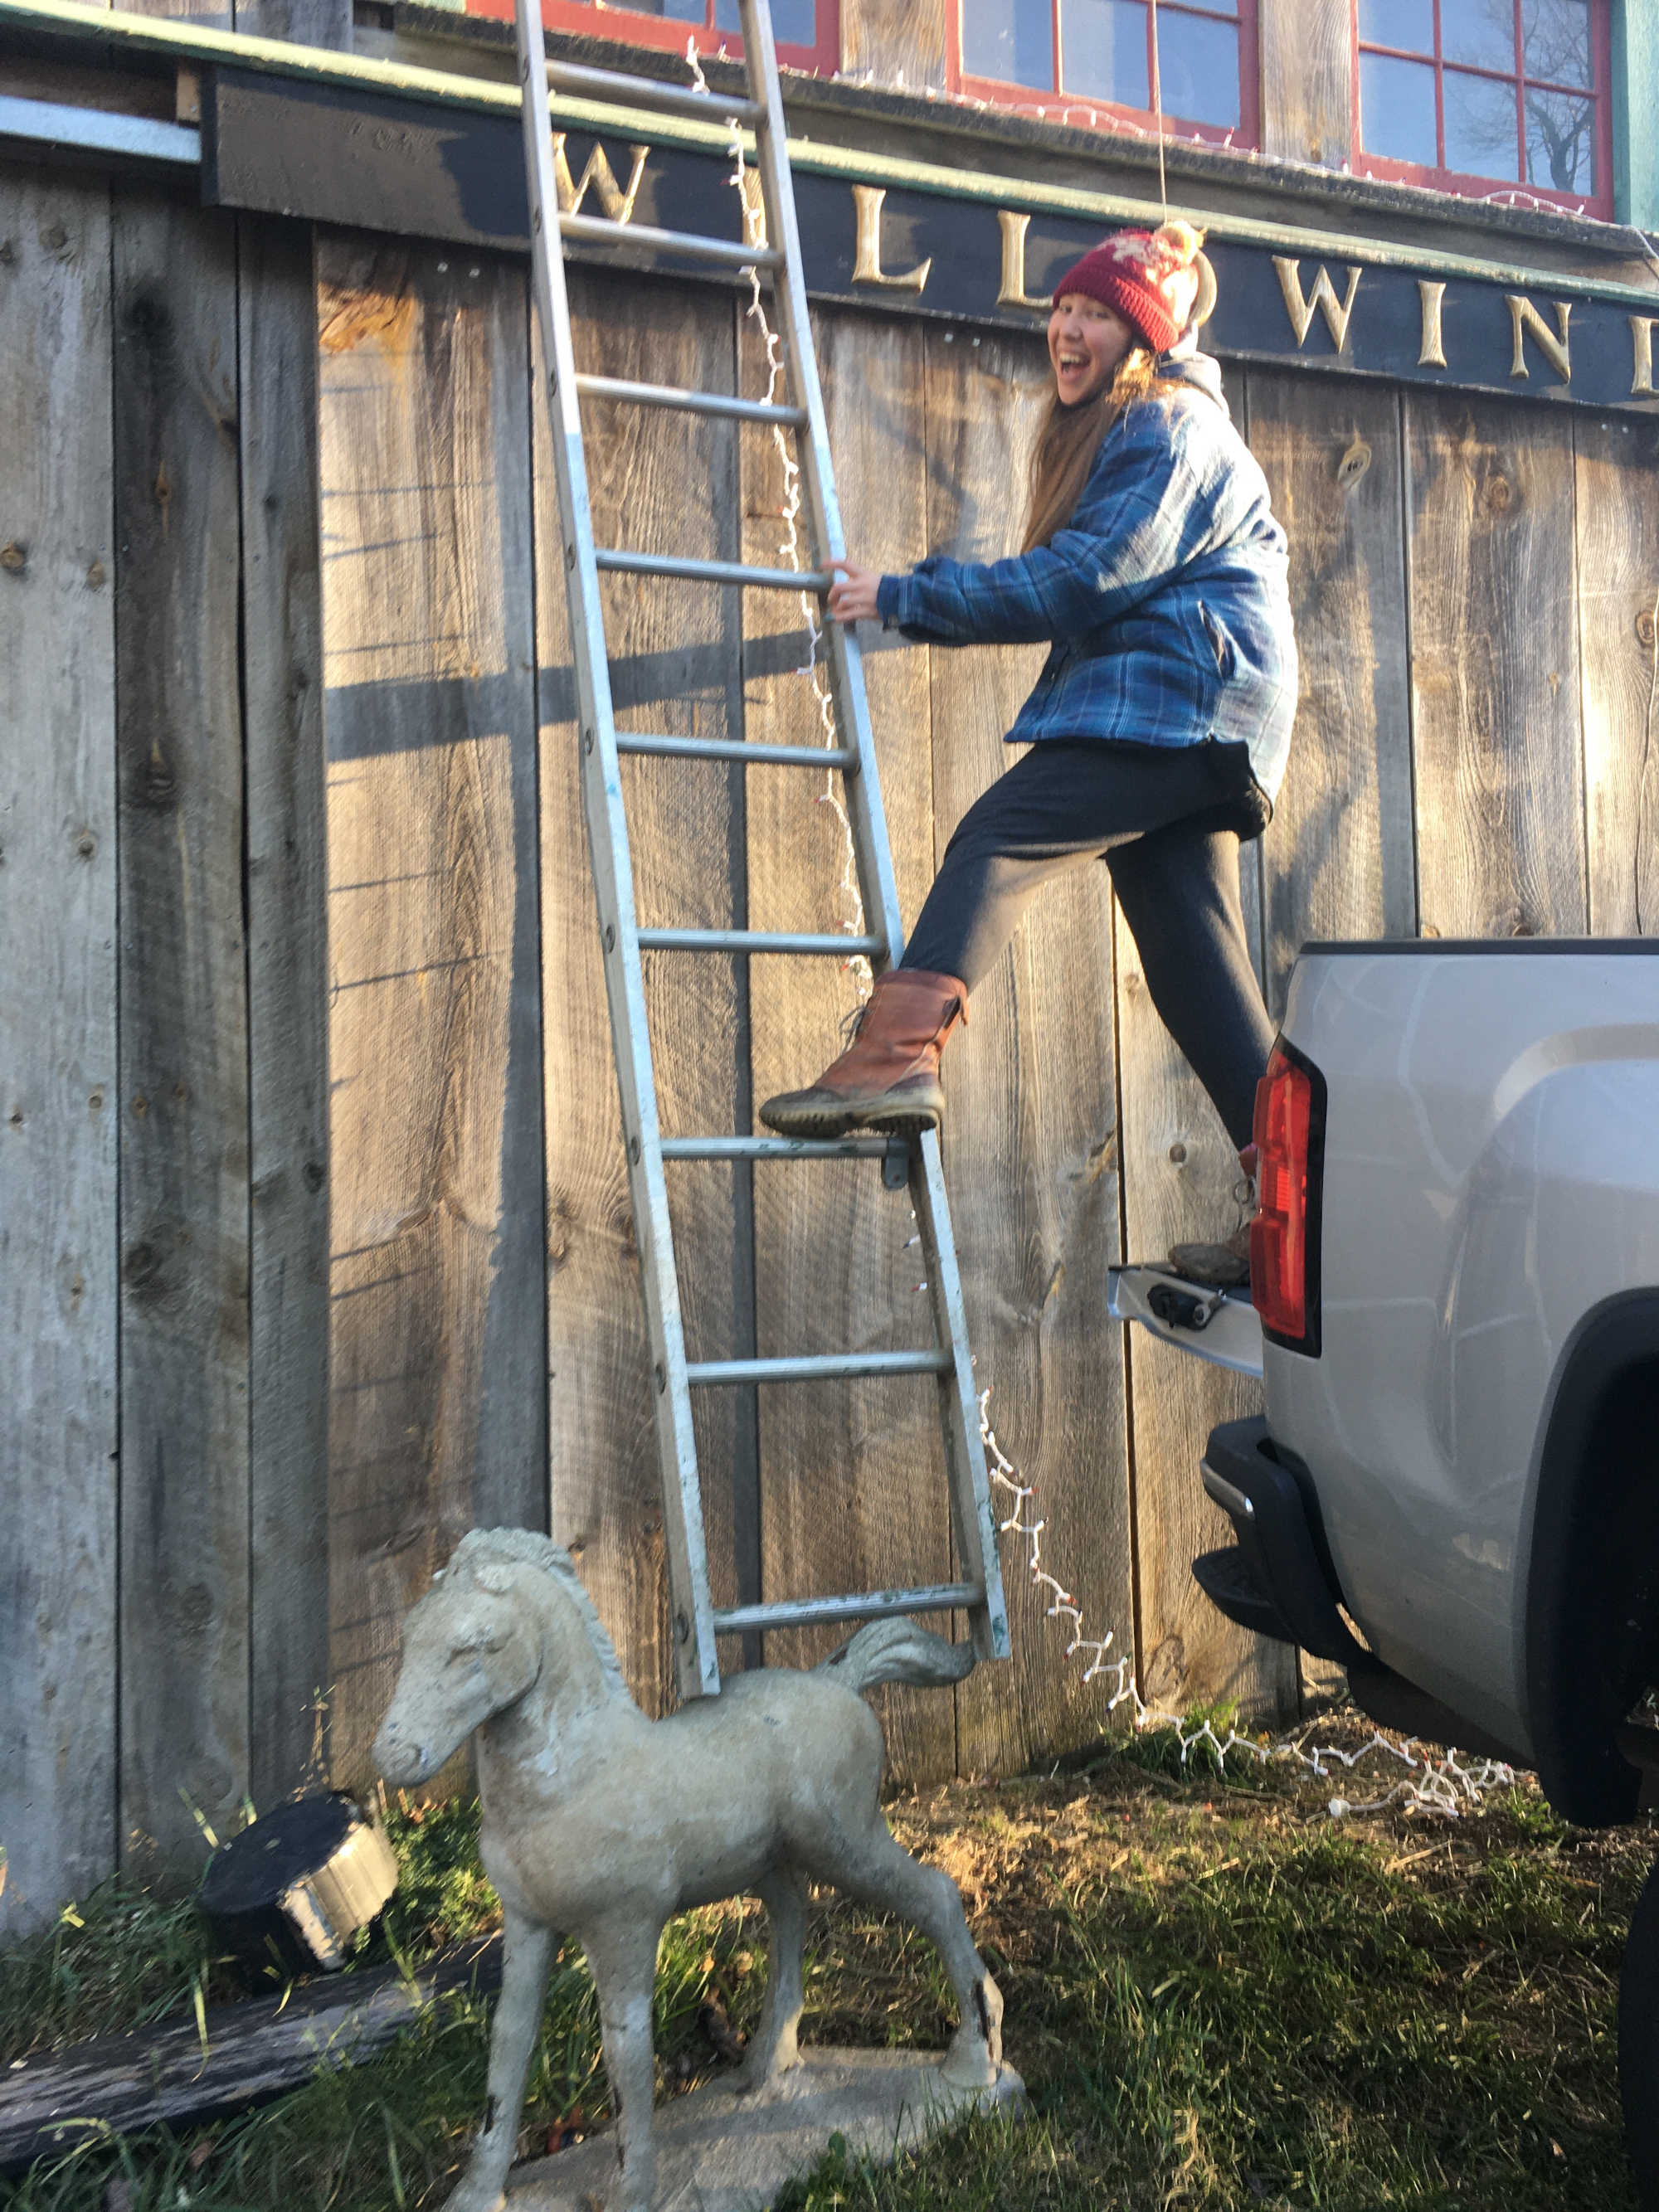 Putting Willowind sign on barn